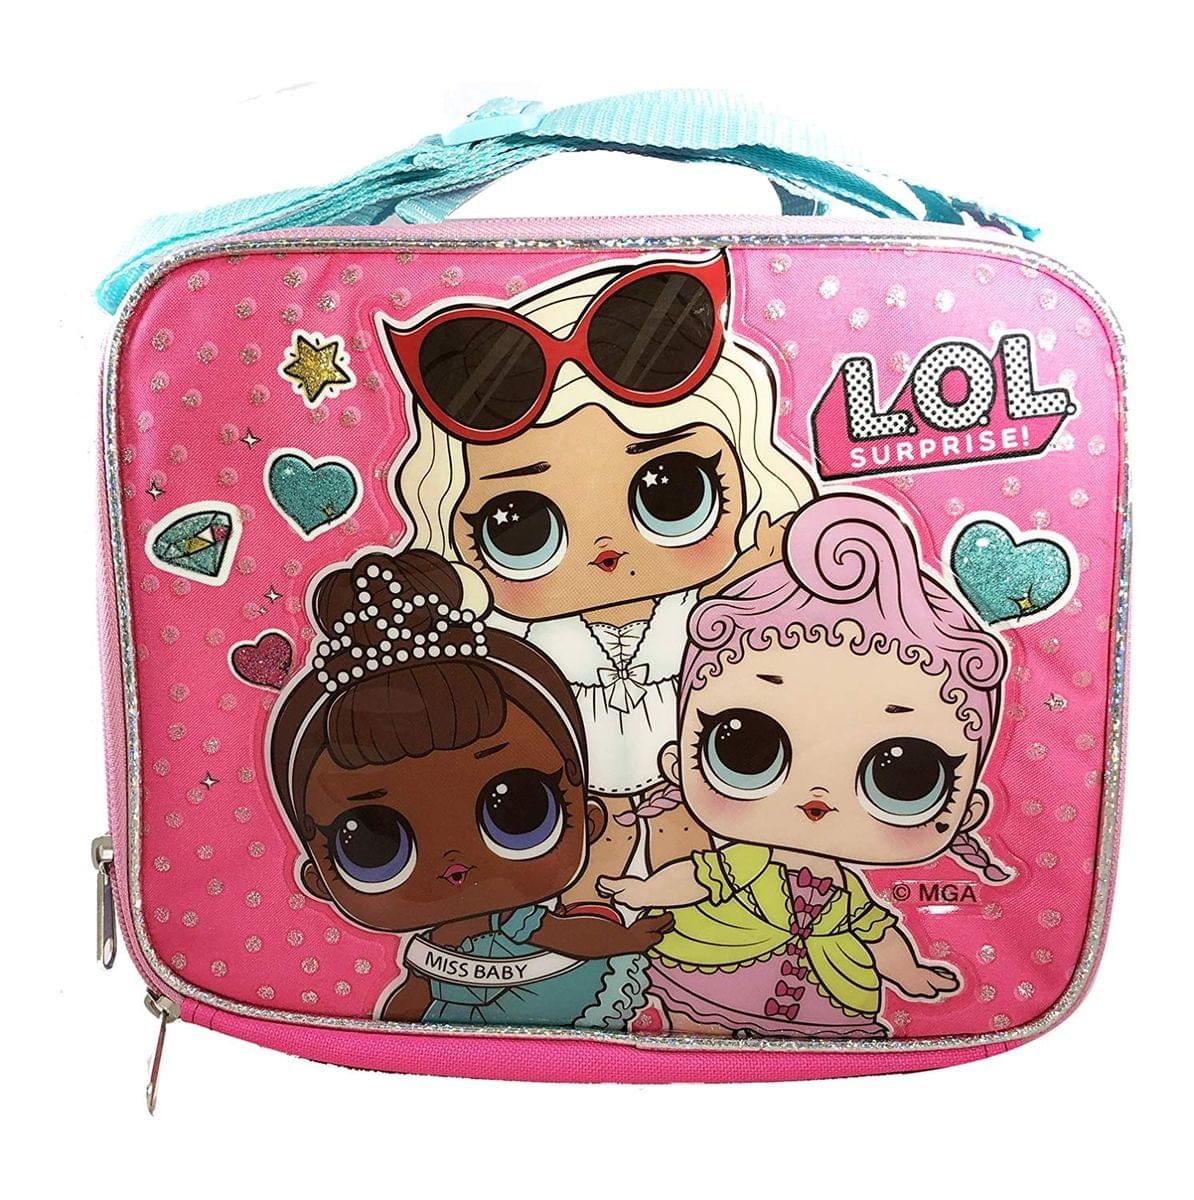 LOL Surprise! Glam Club Insulated Pink Lunch Tote w/ Shoulder Strap